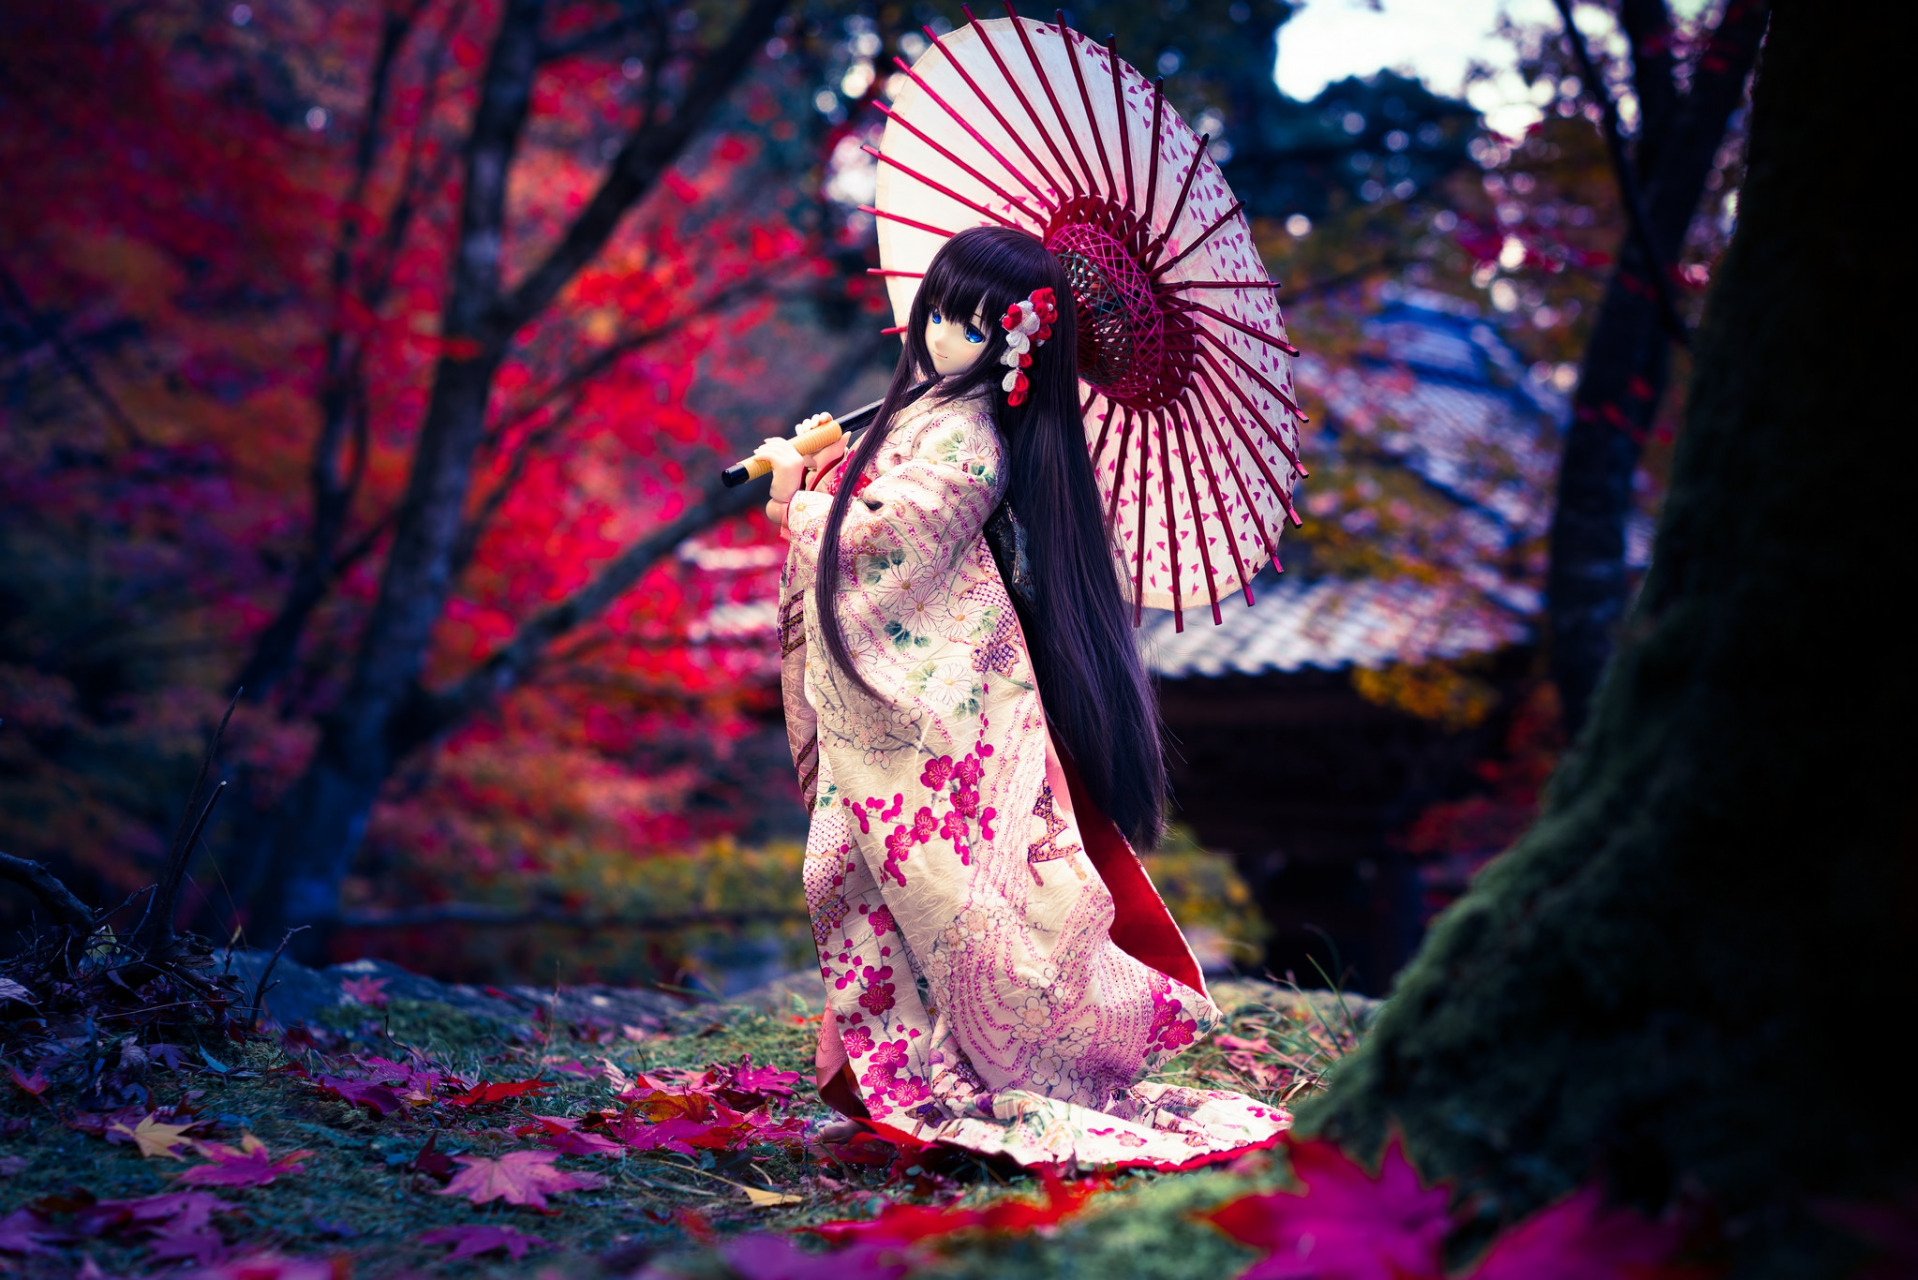 Japanese Girl with Parasol